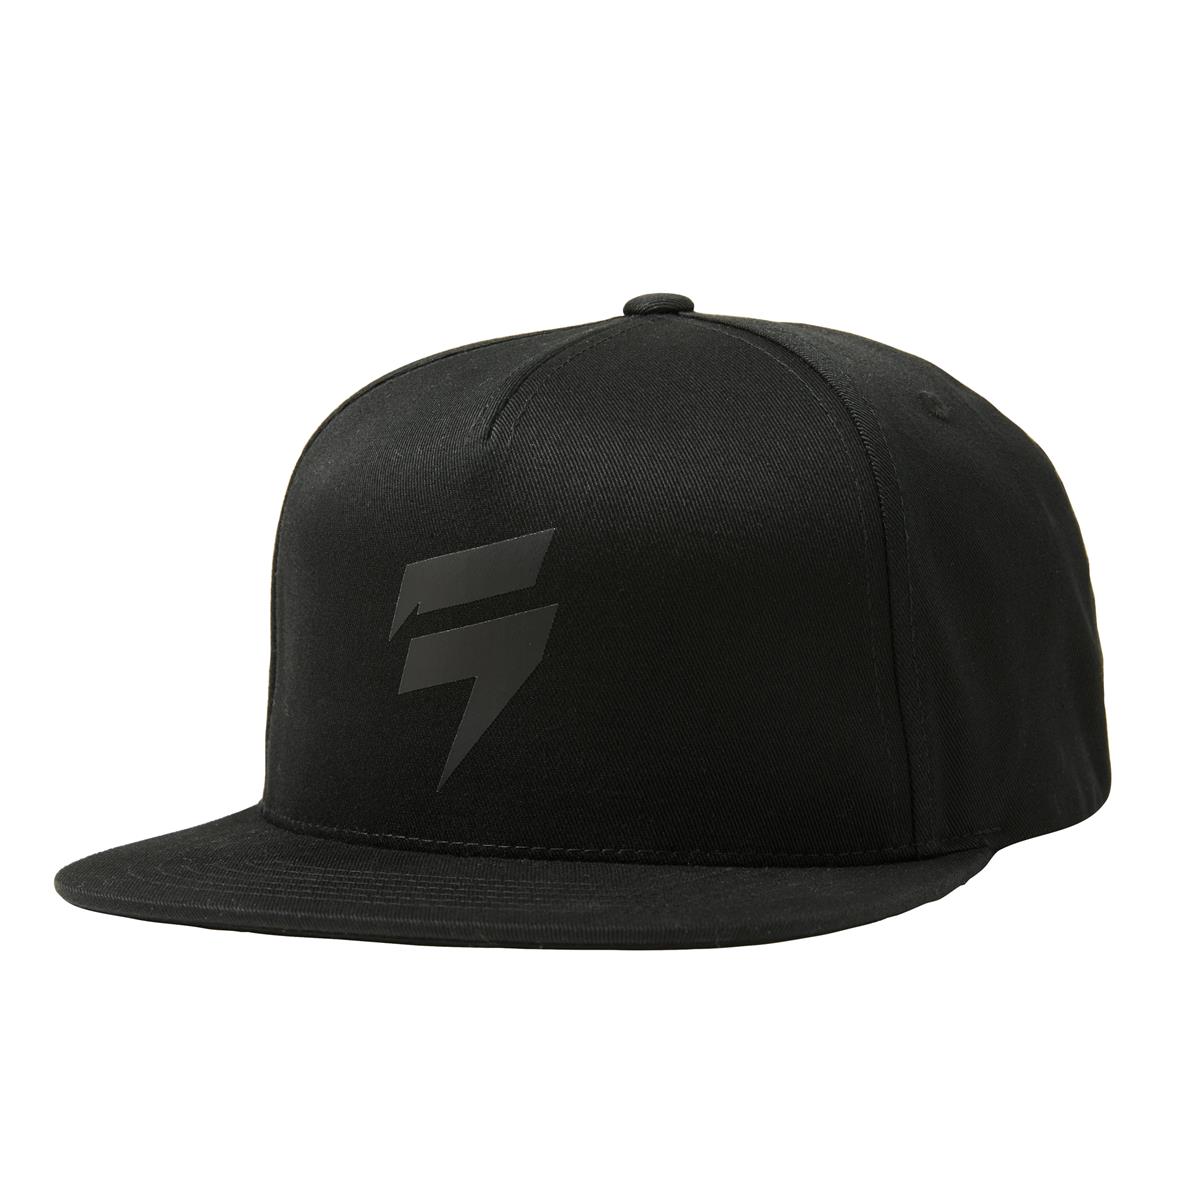 Shift Cappellino Snap Back Bolted Nero/Argento